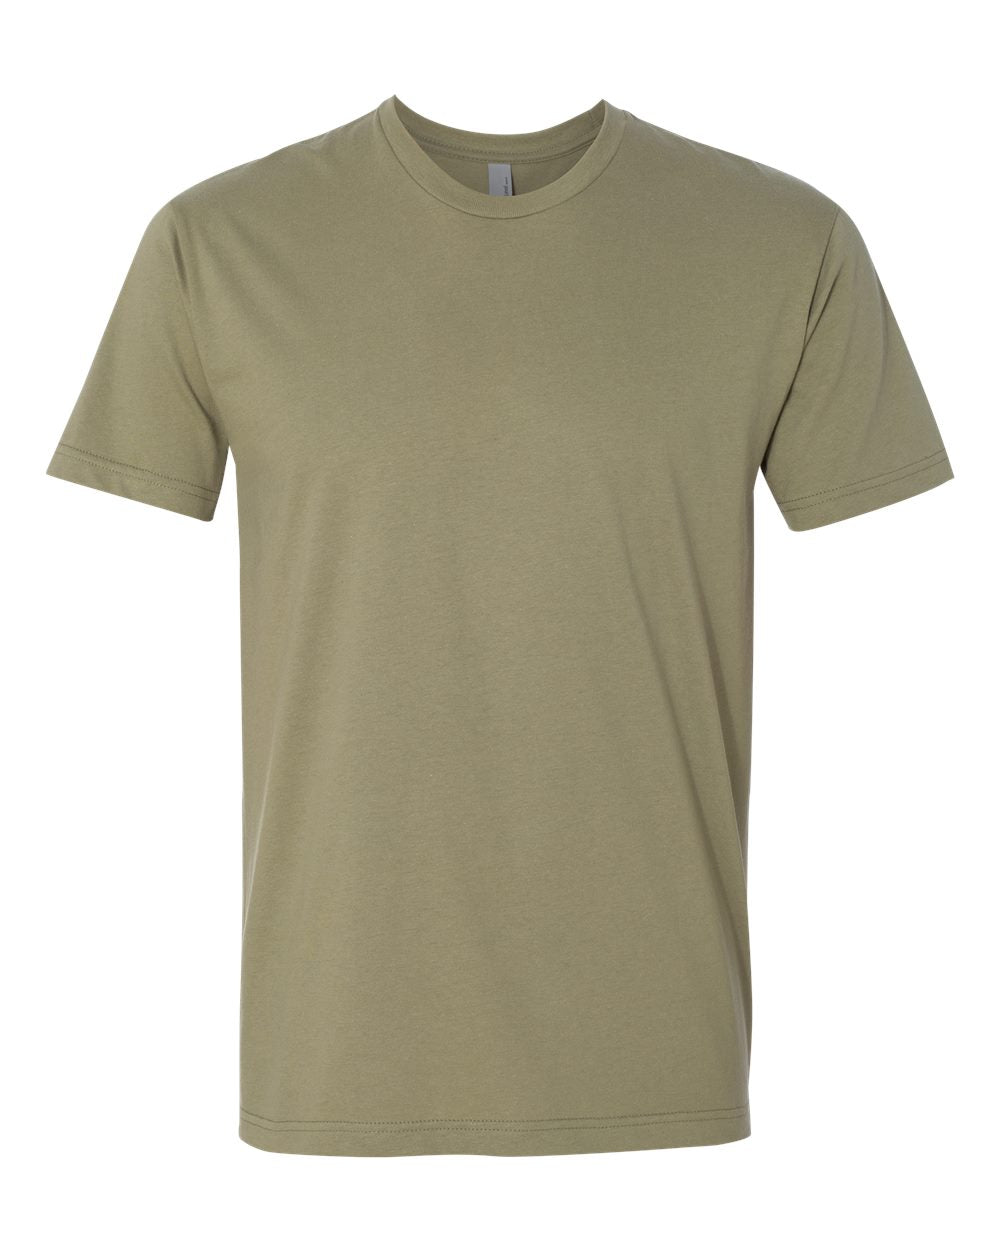 Next Level Cotton Tee (3600) in Light Olive